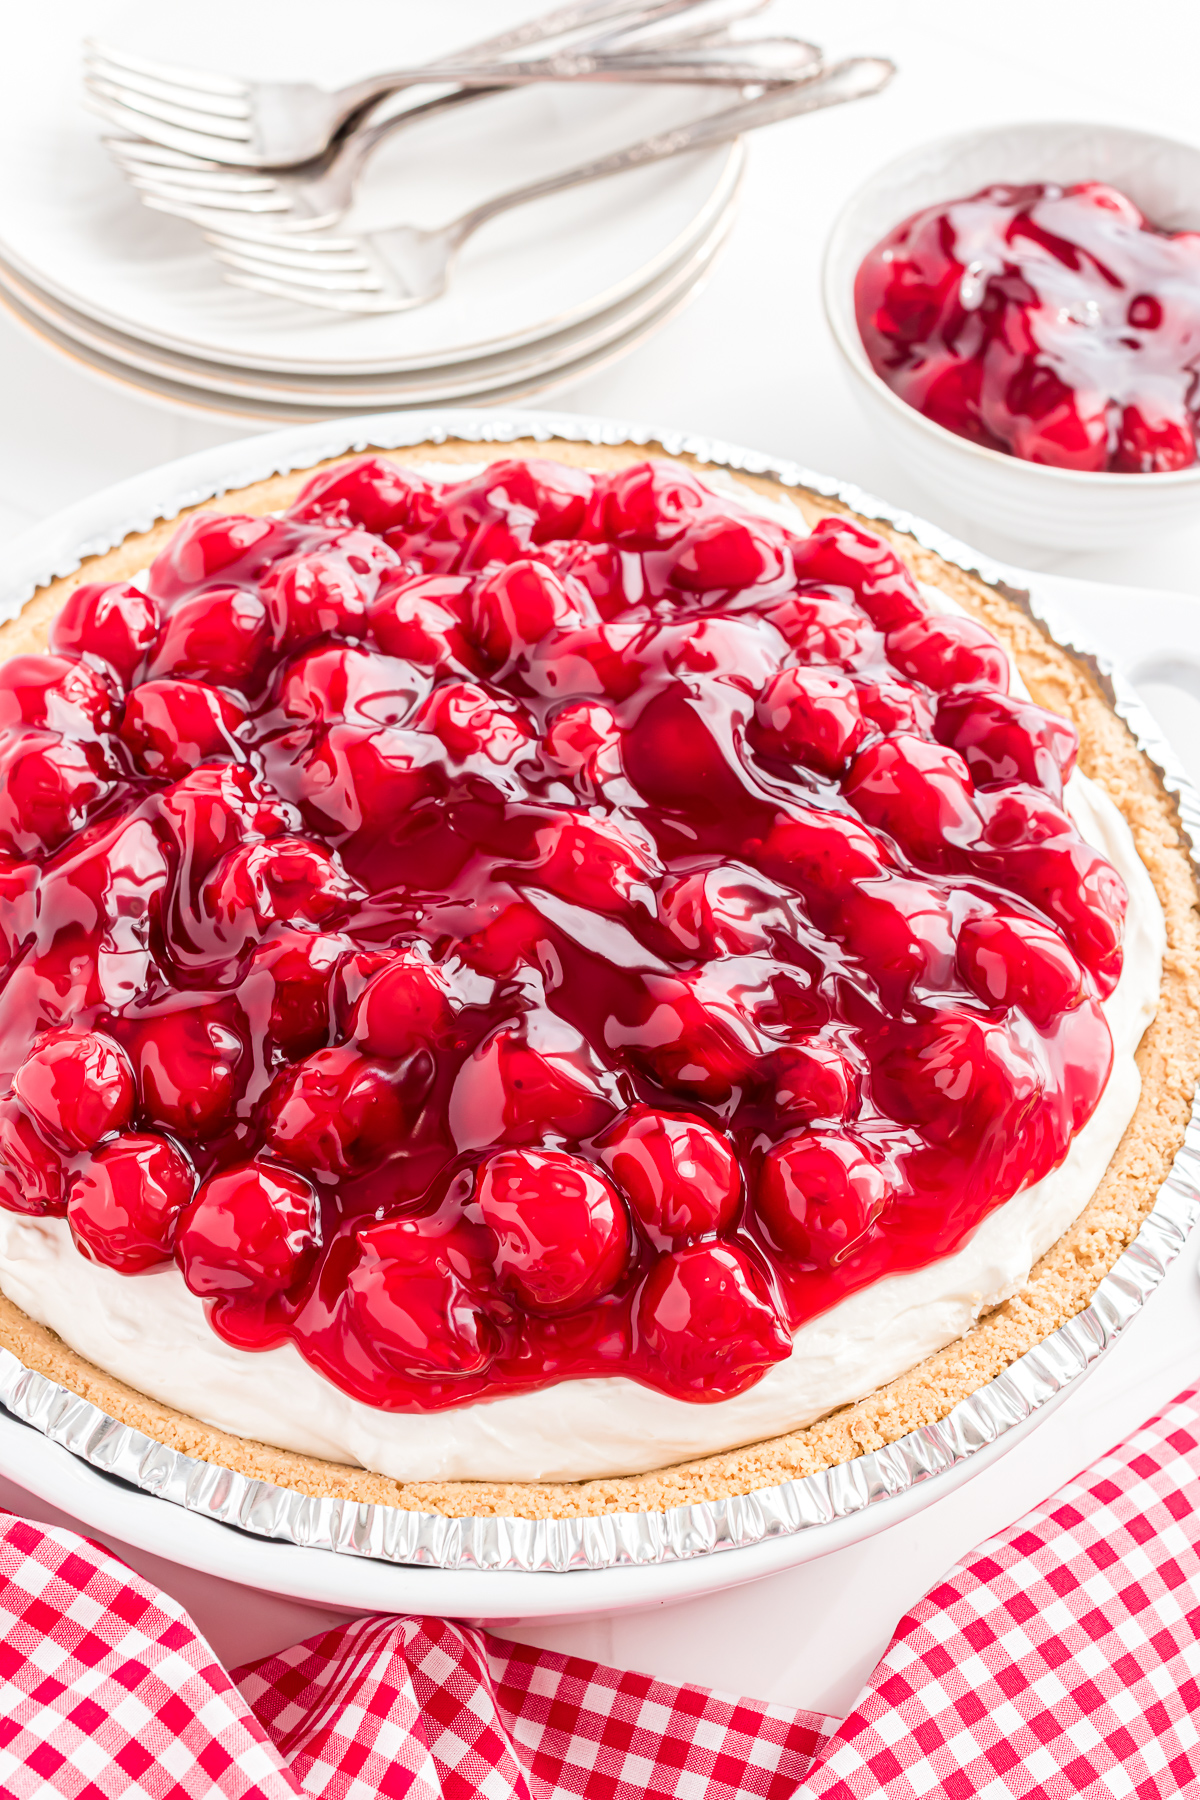 A pie plate with a No Bake Cherry Pie. There is a stack of small dessert plates in the background and a dish of cherry pie filling.